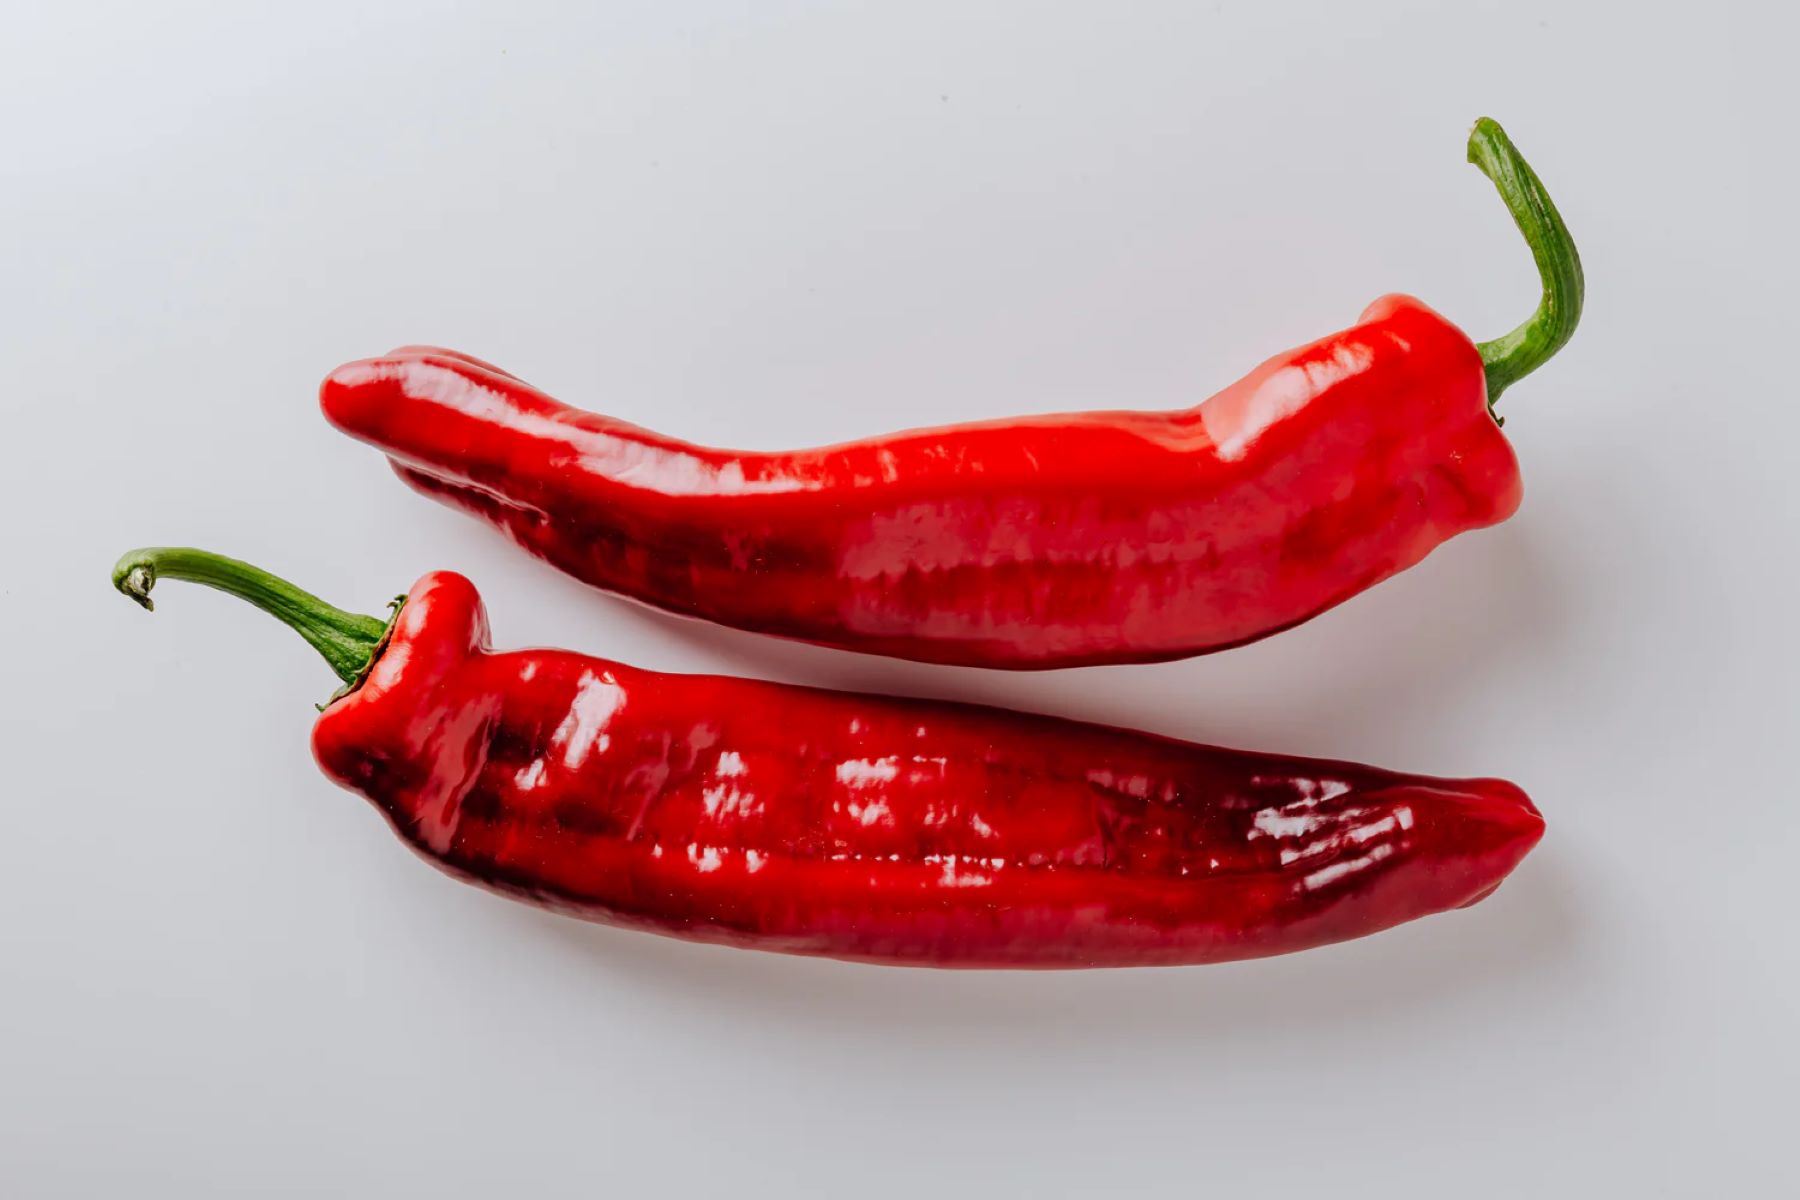 Surprising News: Chili And Type 2 Diabetes – A Perfect Match!